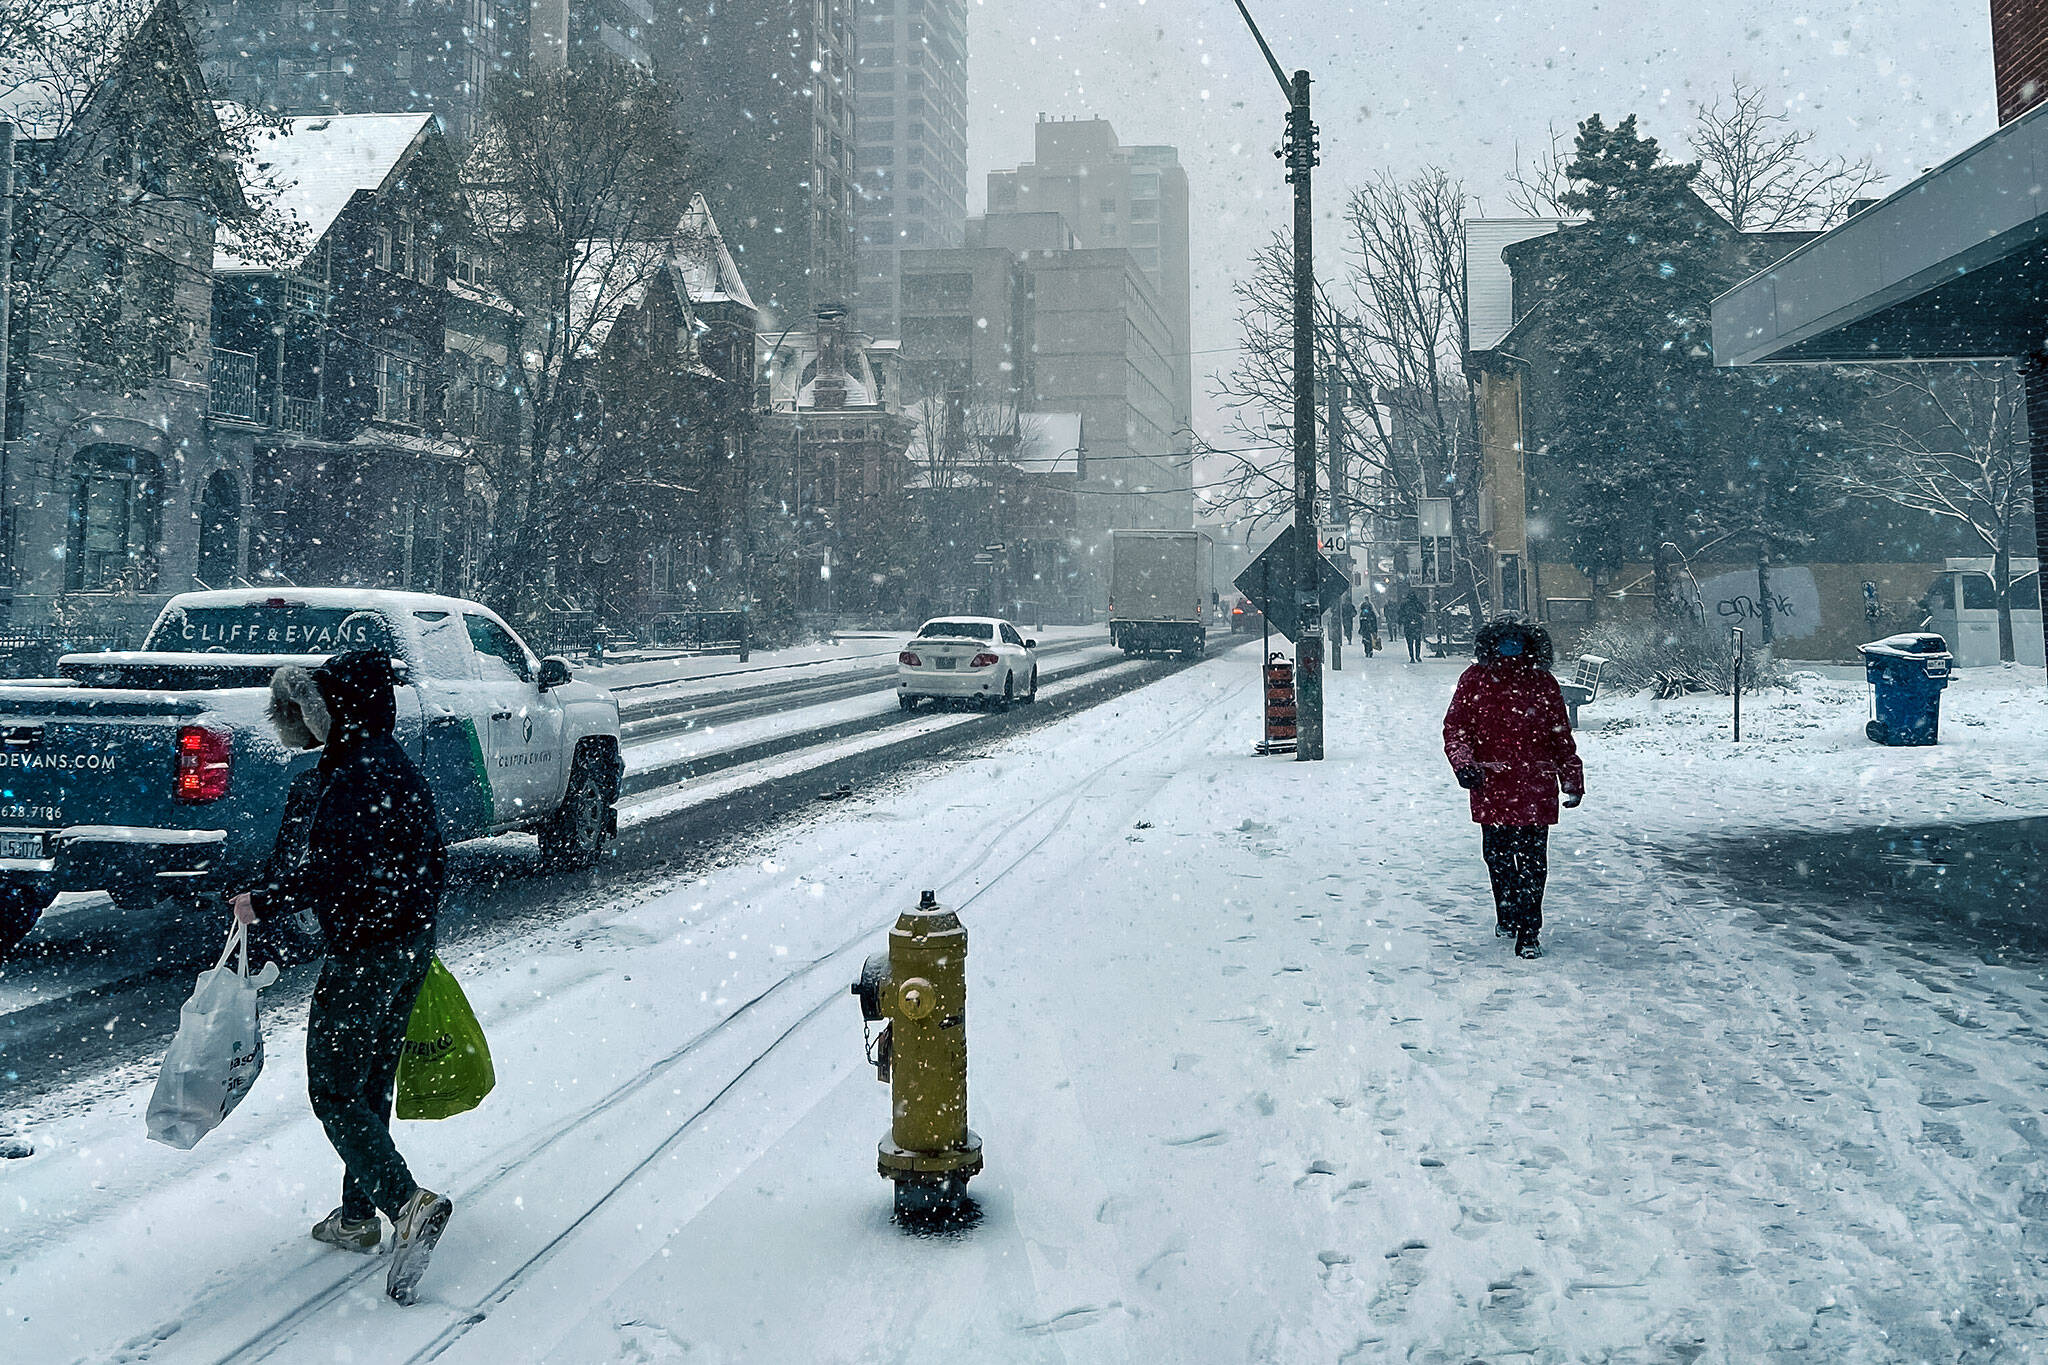 Toronto was just hit with weather statement warning of up to 10 cm of snow